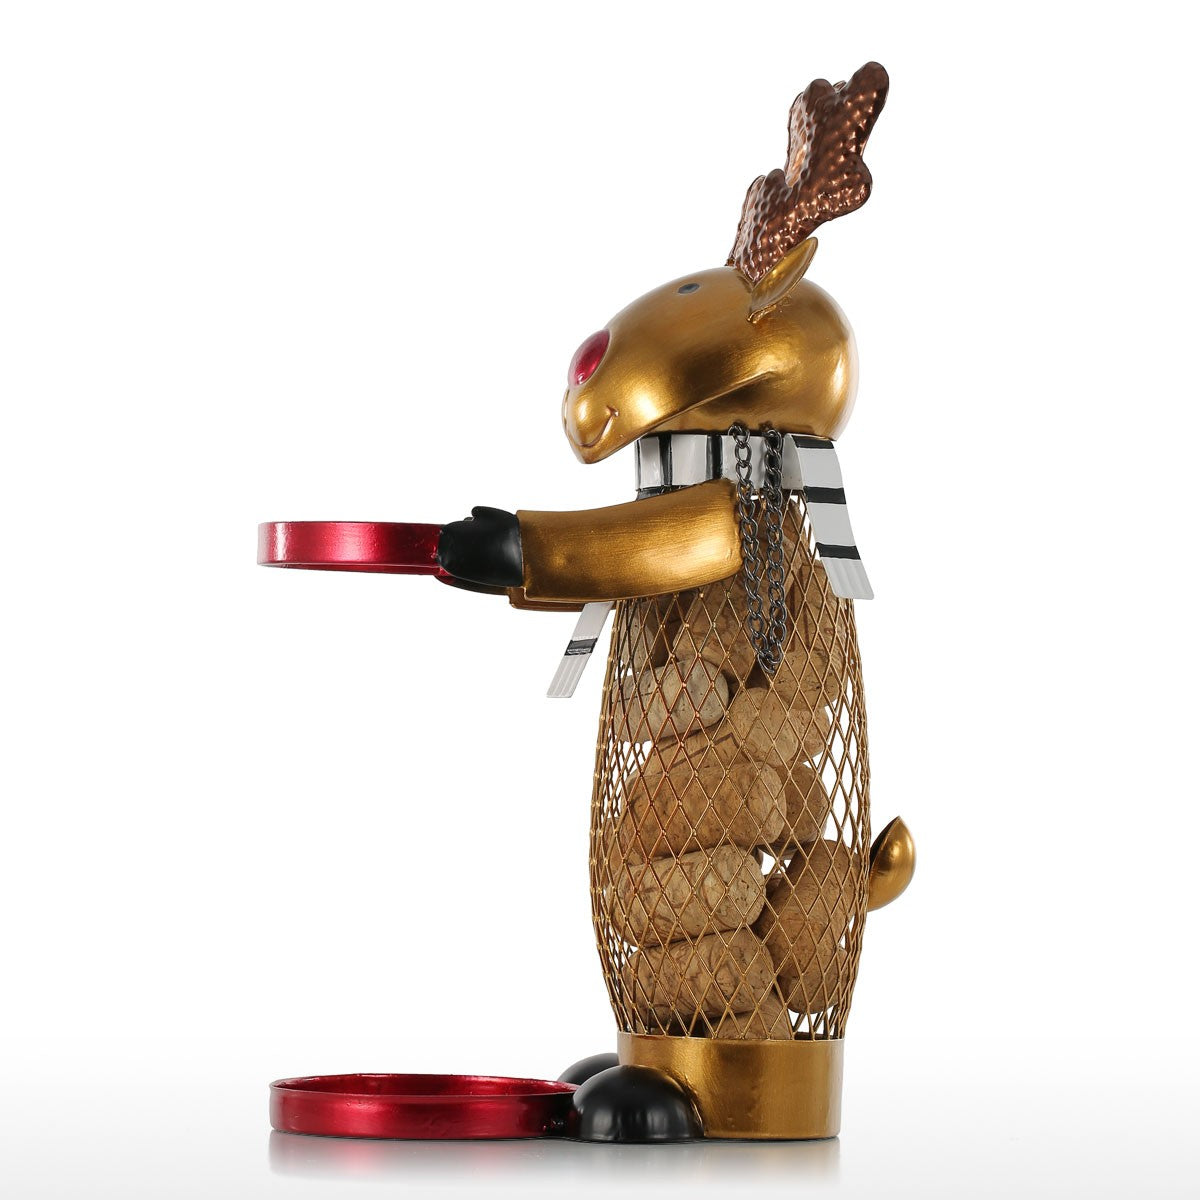 Reindeer wine bottle holder is the cutest item to for the holidays